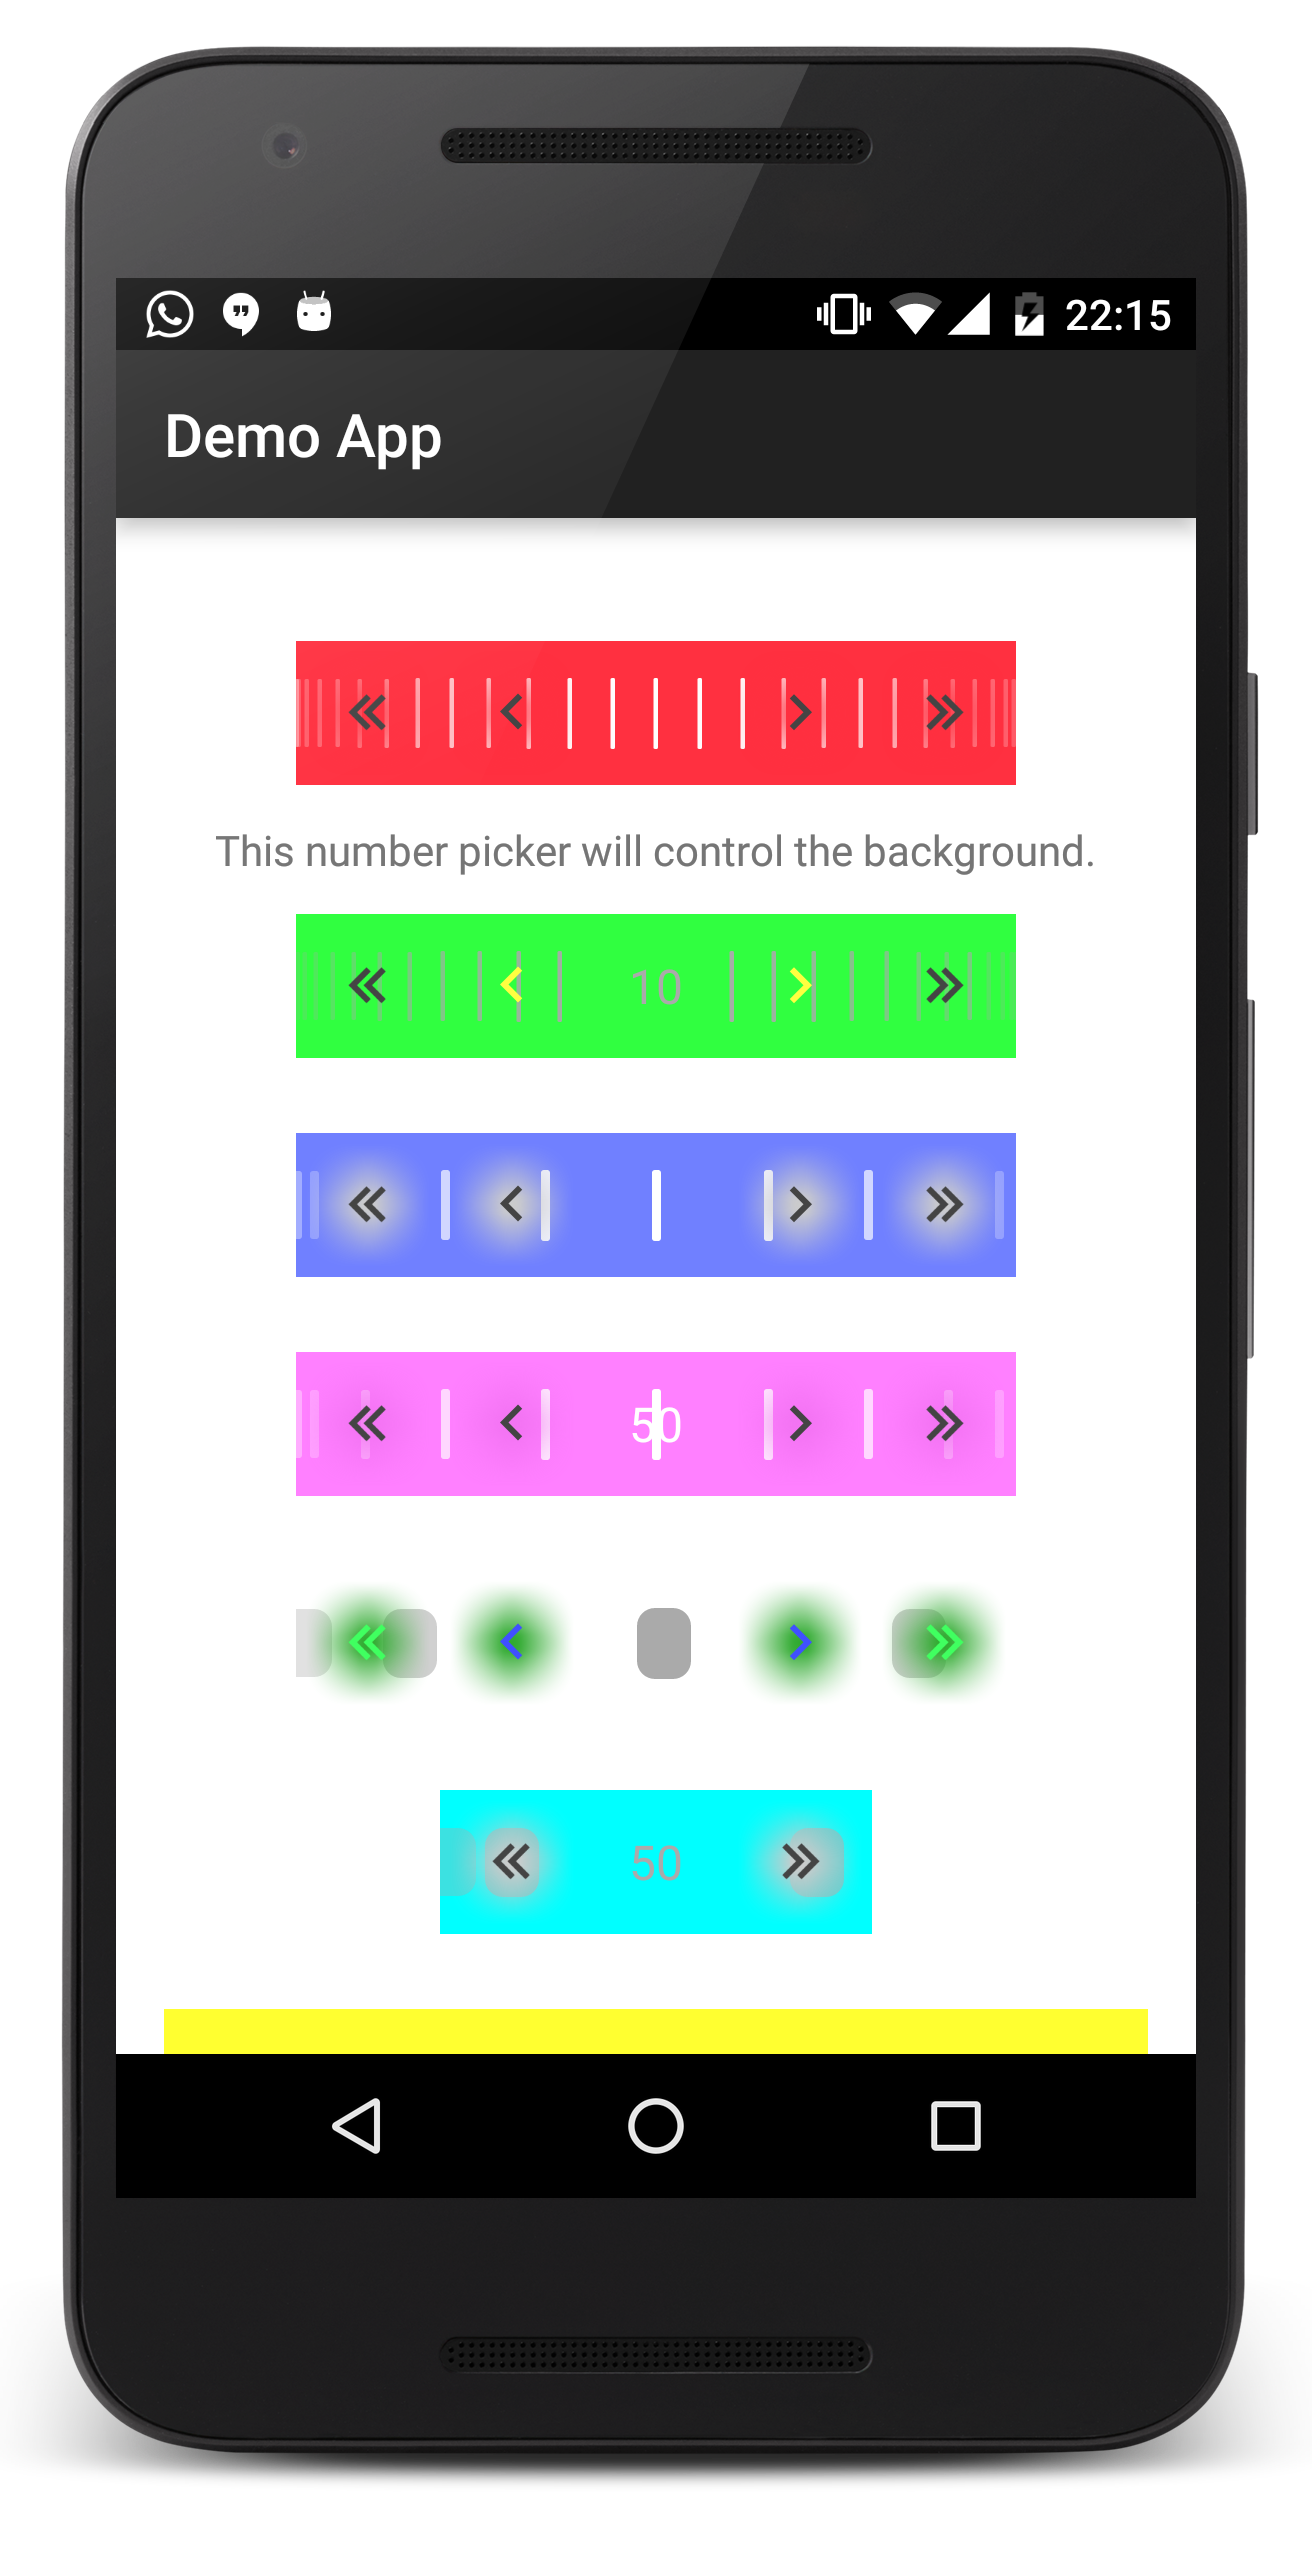 GitHub - milosmns/actual-number-picker: Android: A horizontal number picker